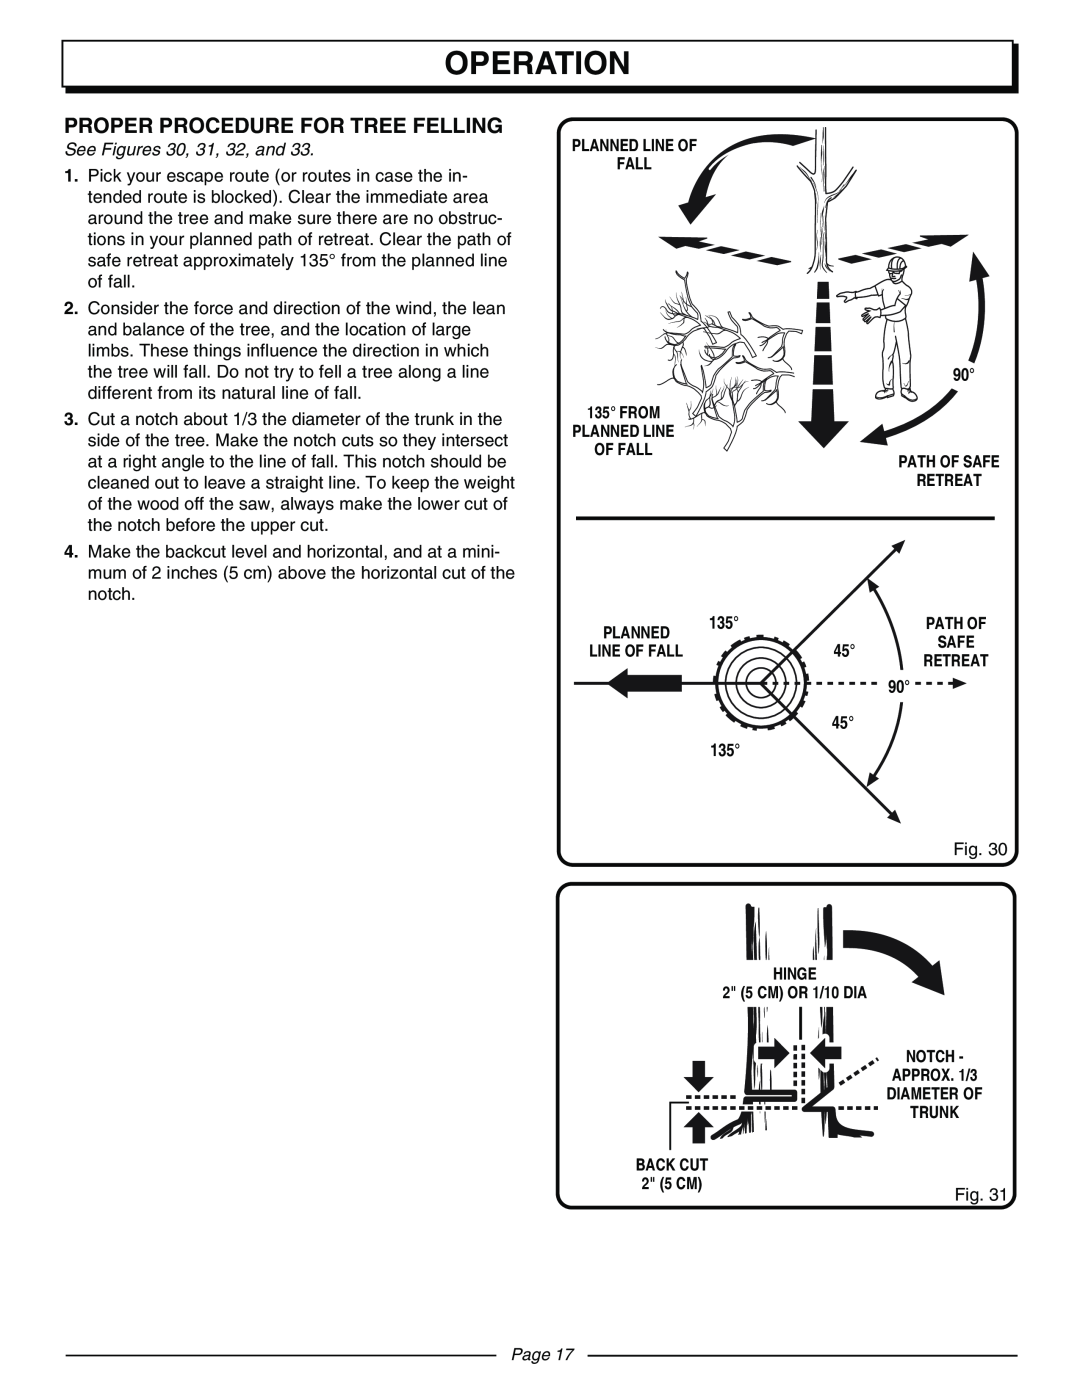 Homelite UT10942D manual Proper Procedure For Tree Felling, Operation, See Figures 30, 31, 32, and, Page 